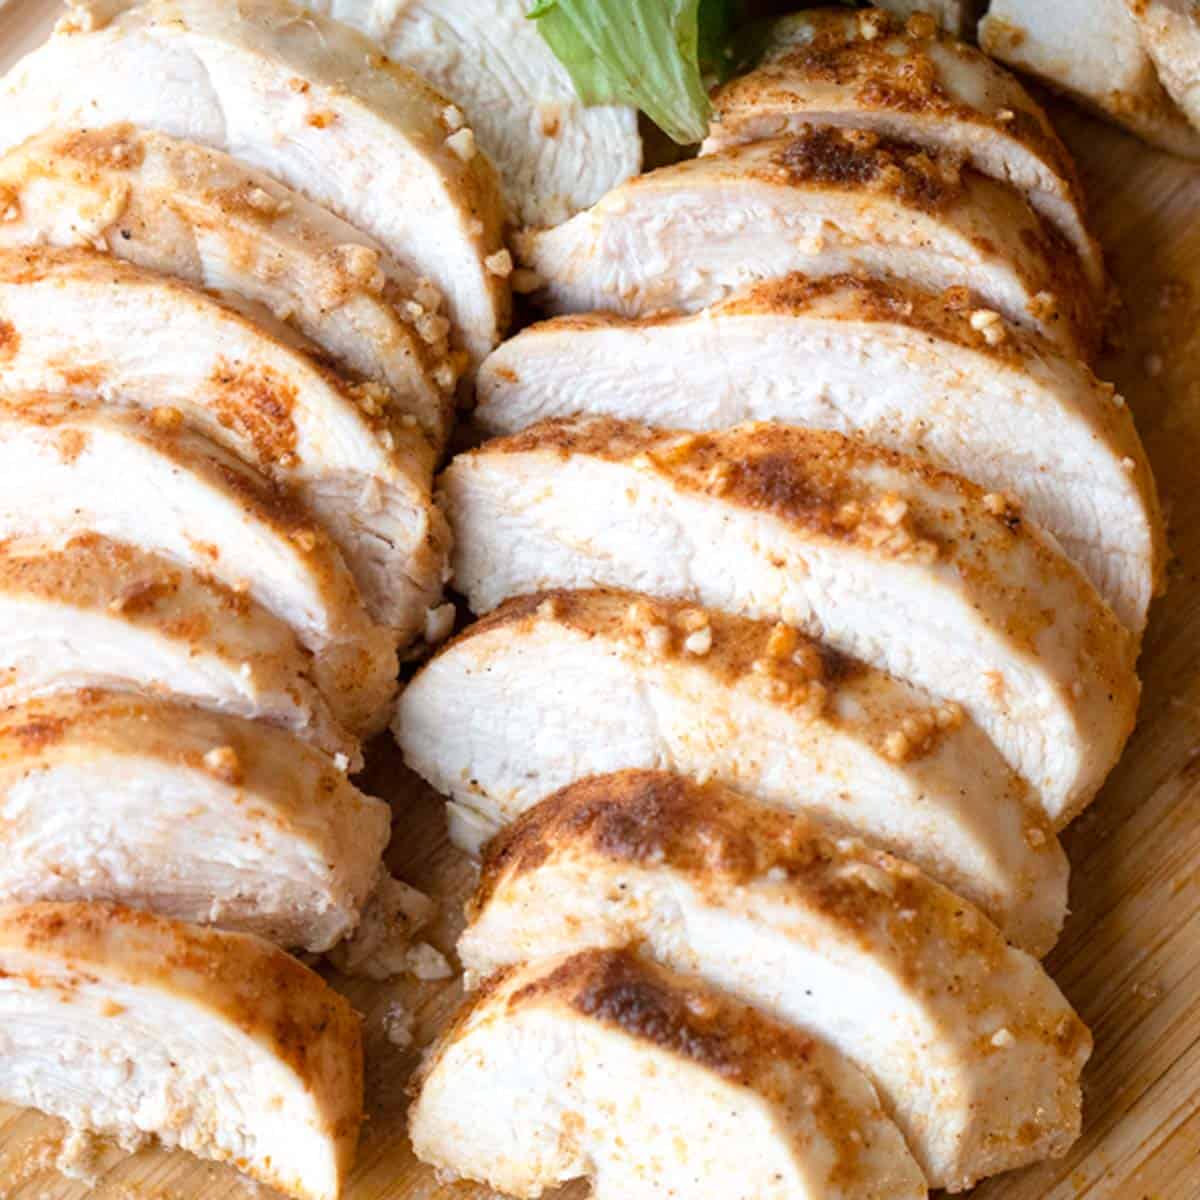 best baked chicken breast on a wood cutting board, oven baked boneless chicken breast. recipes for boneless skinless chicken breast.